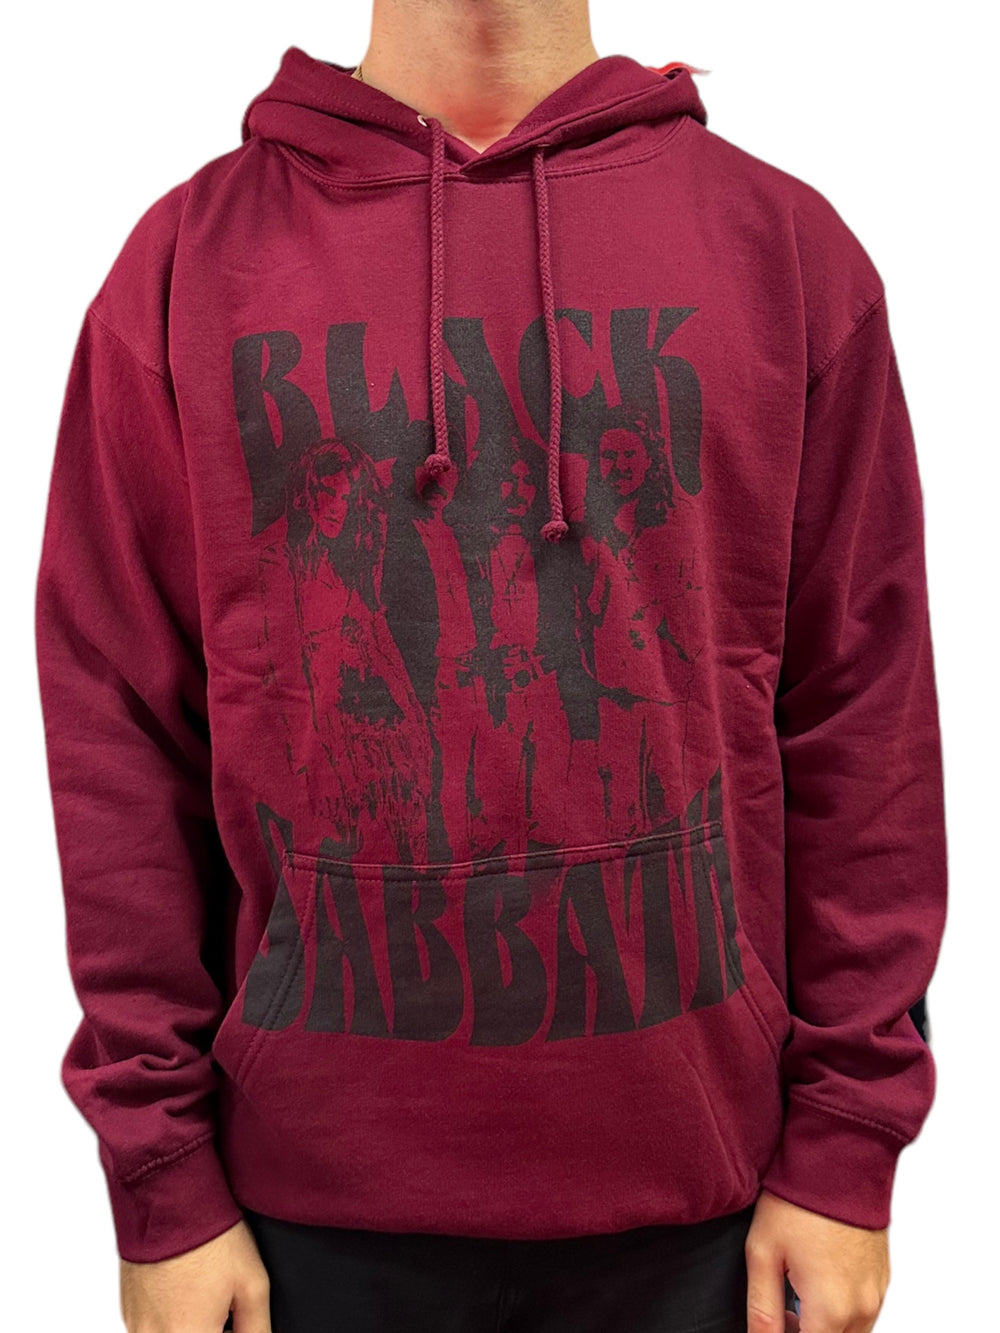 Black Sabbath Maroon Band Pullover Hoodie Unisex Official Brand New Various Sizes